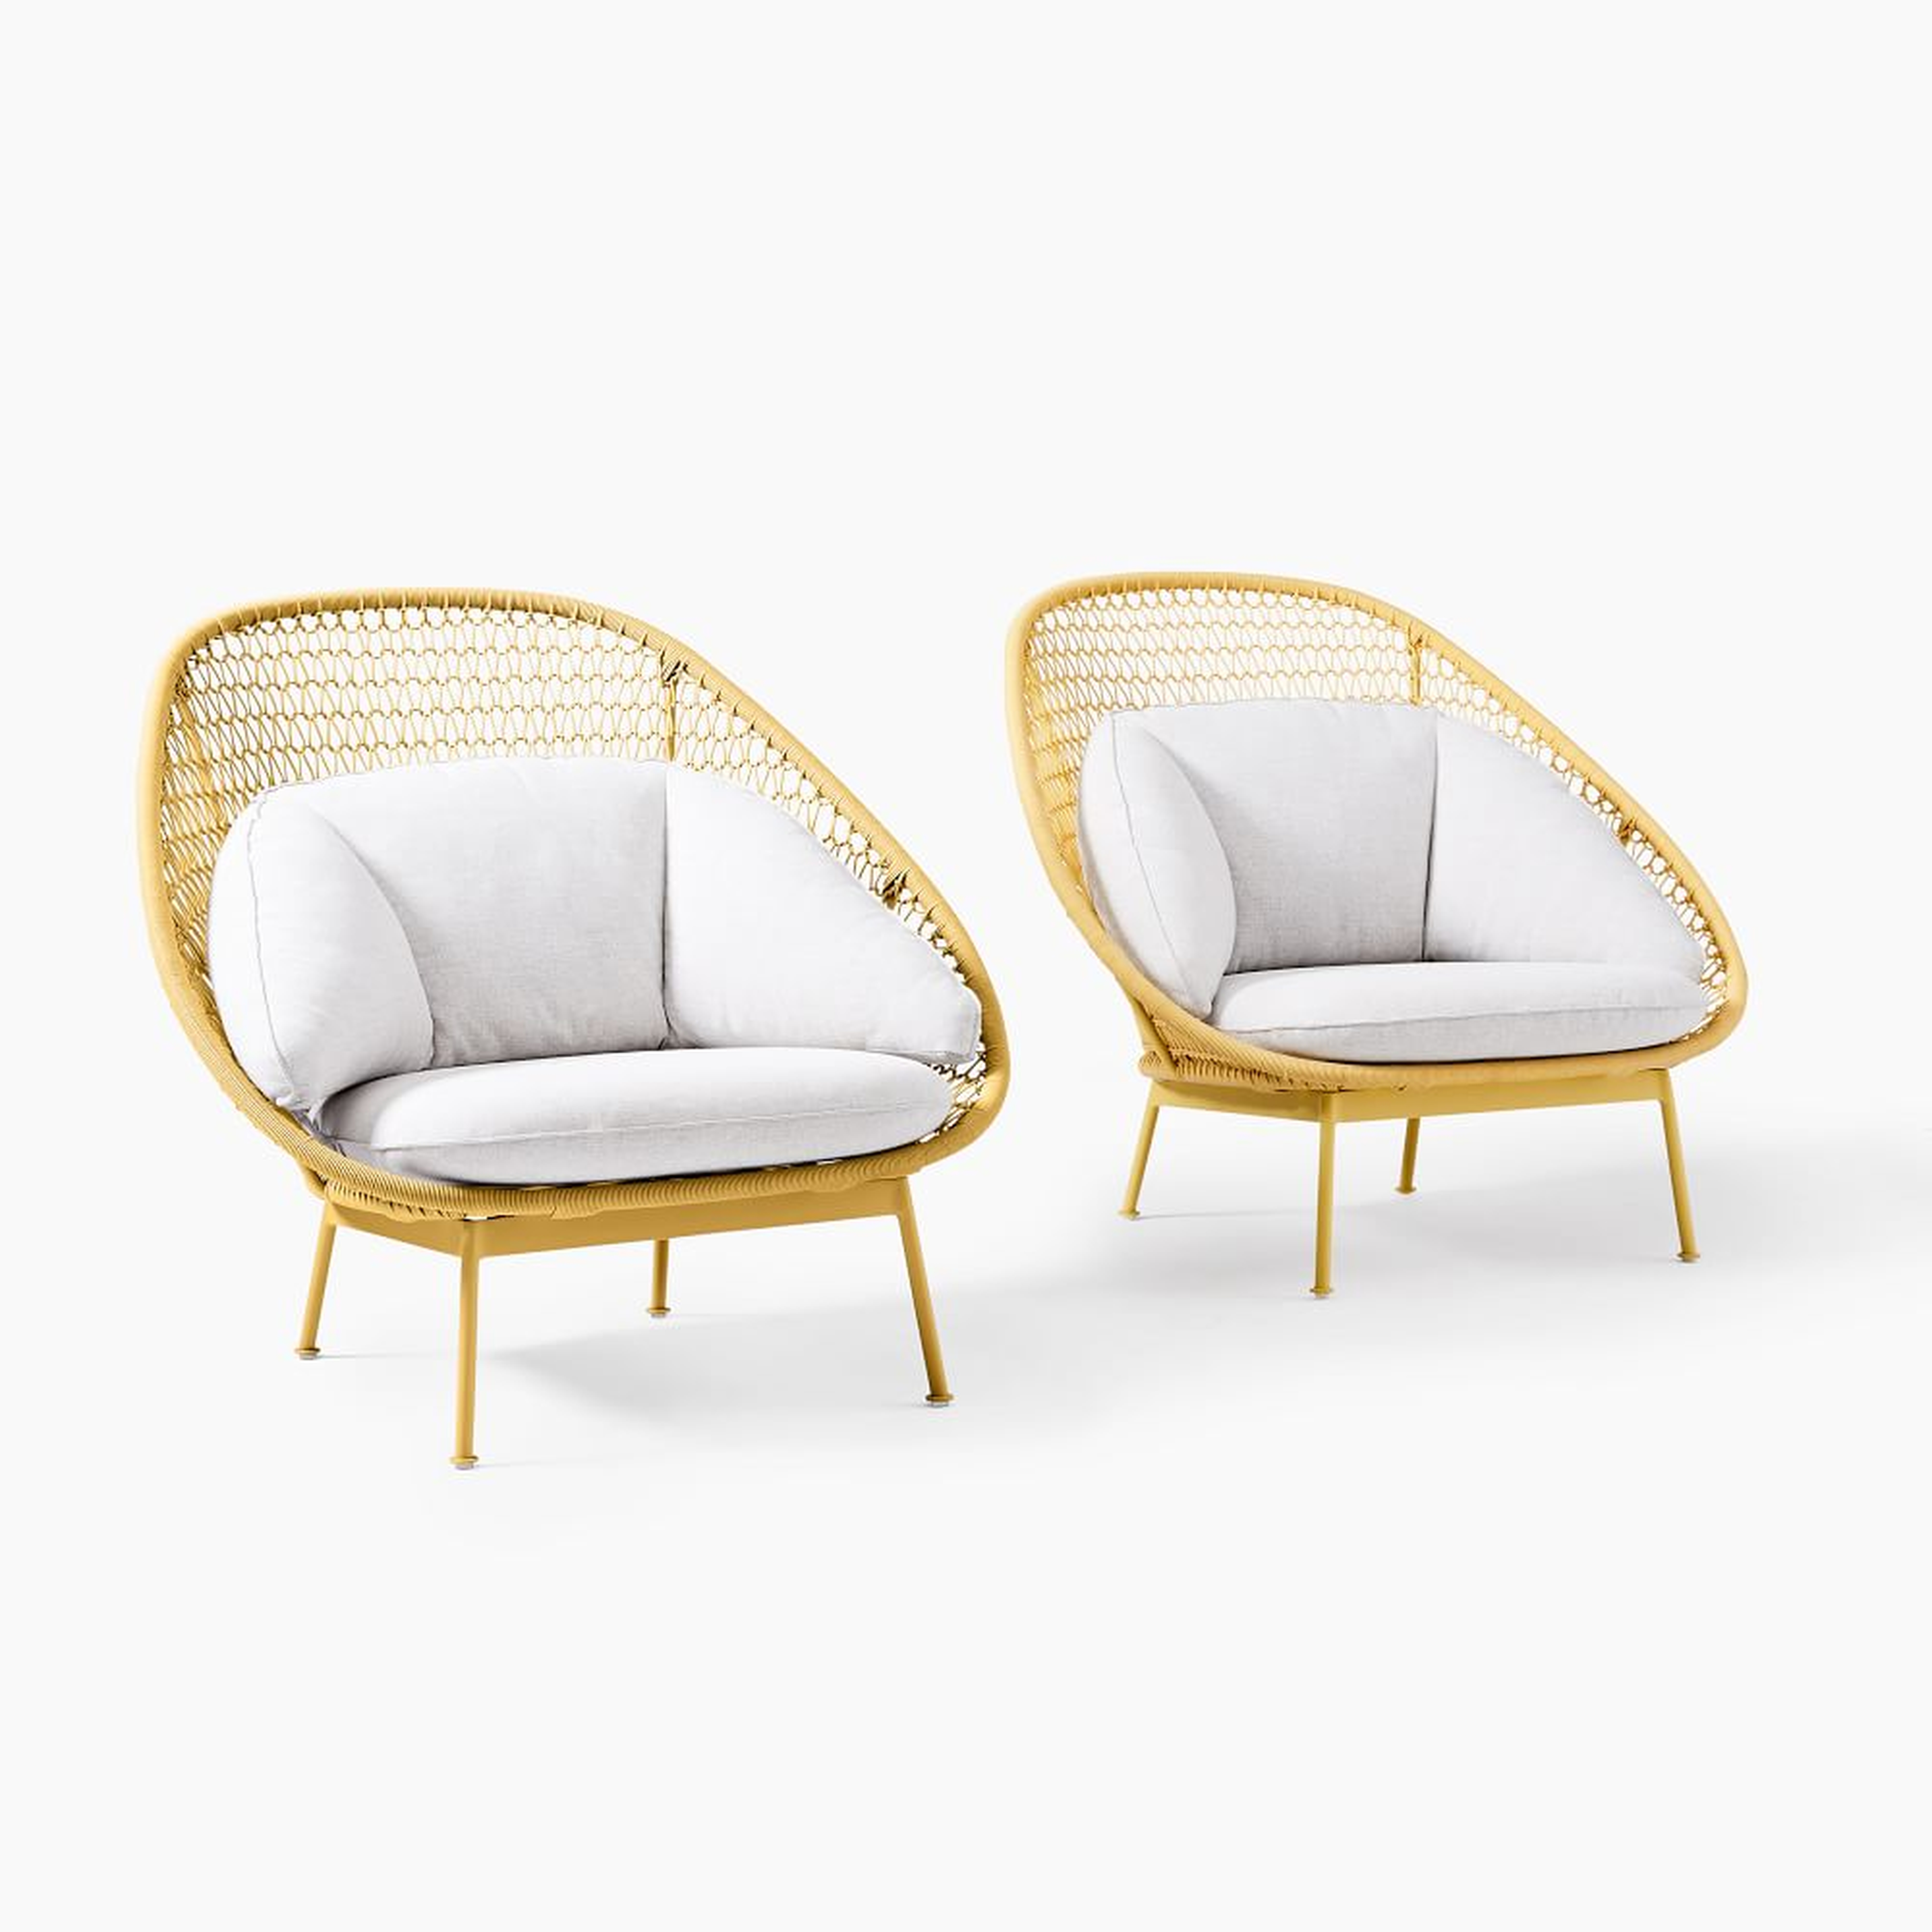 Nest Yellow Lounge Chairs, Set of 2 - West Elm